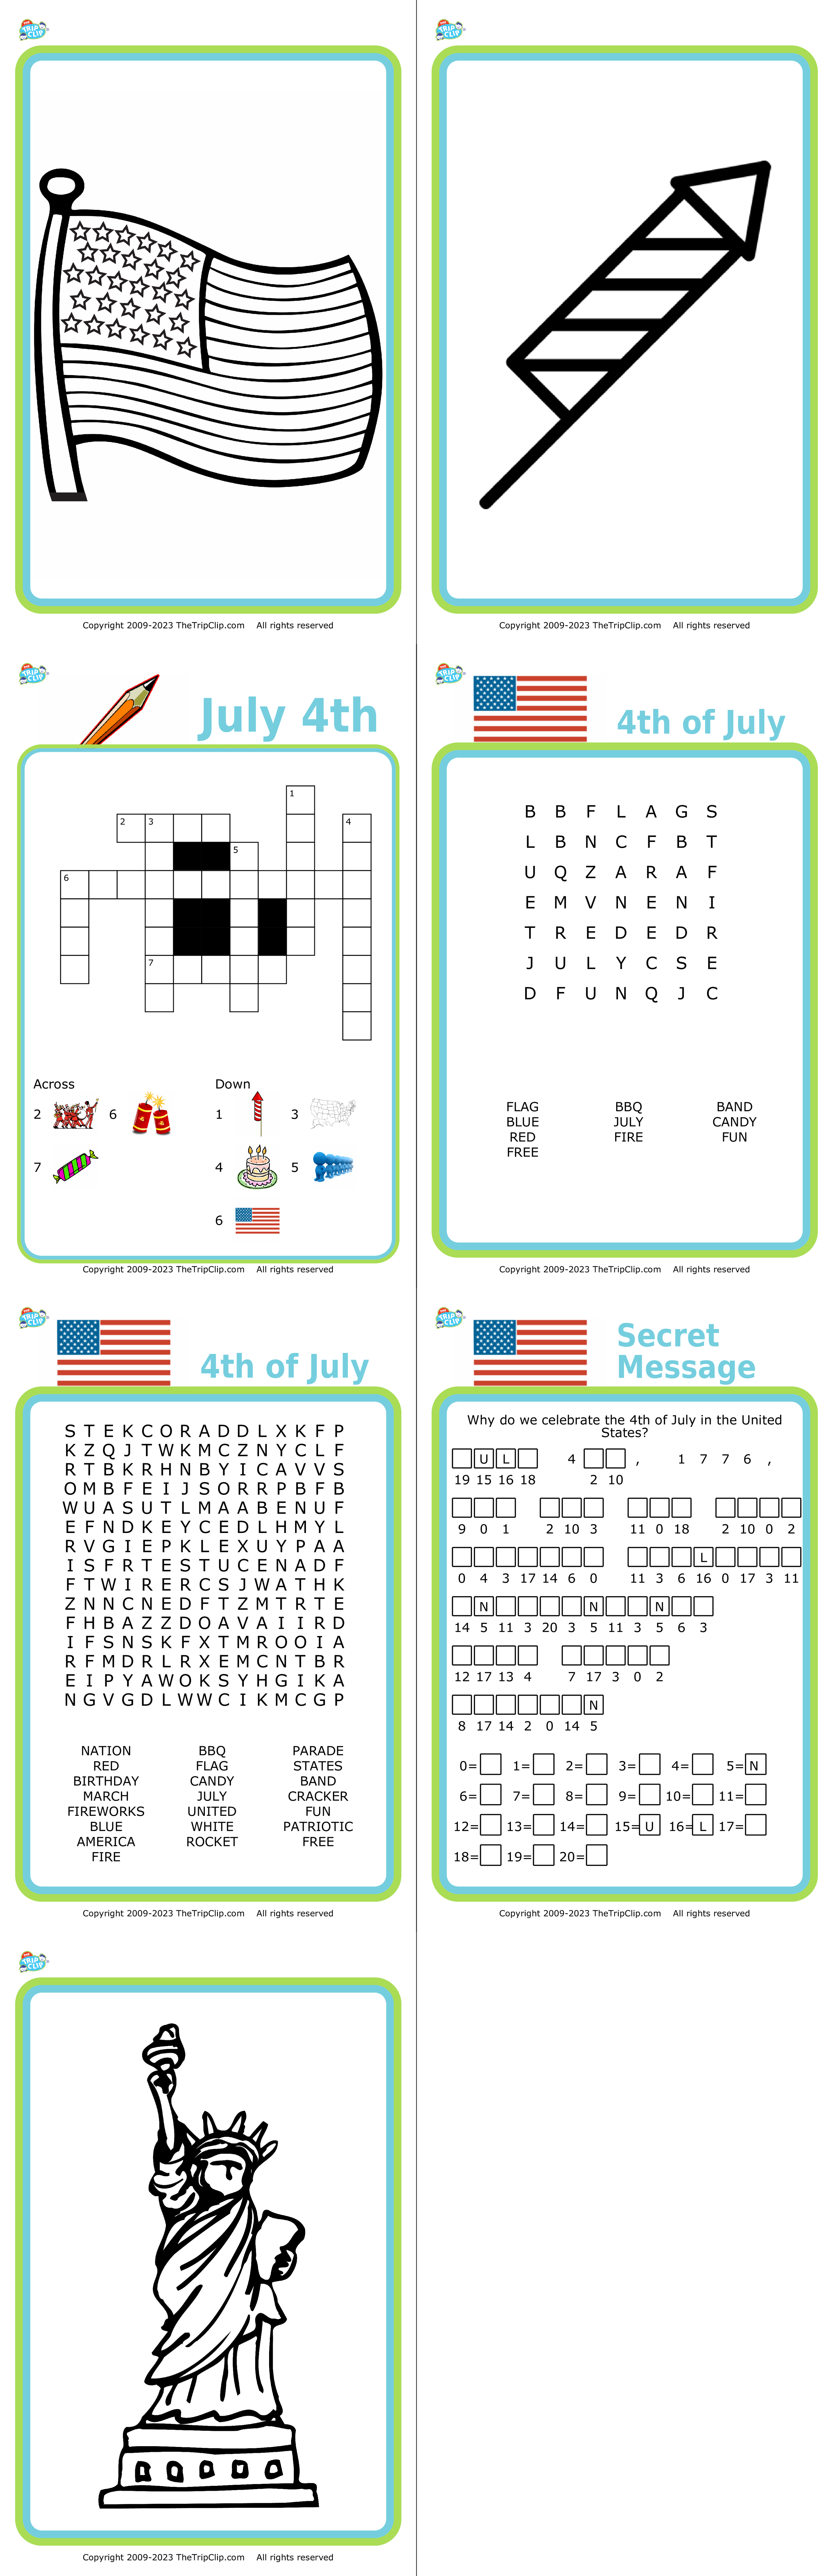 4th of July coloring,word search, and secret message puzzles